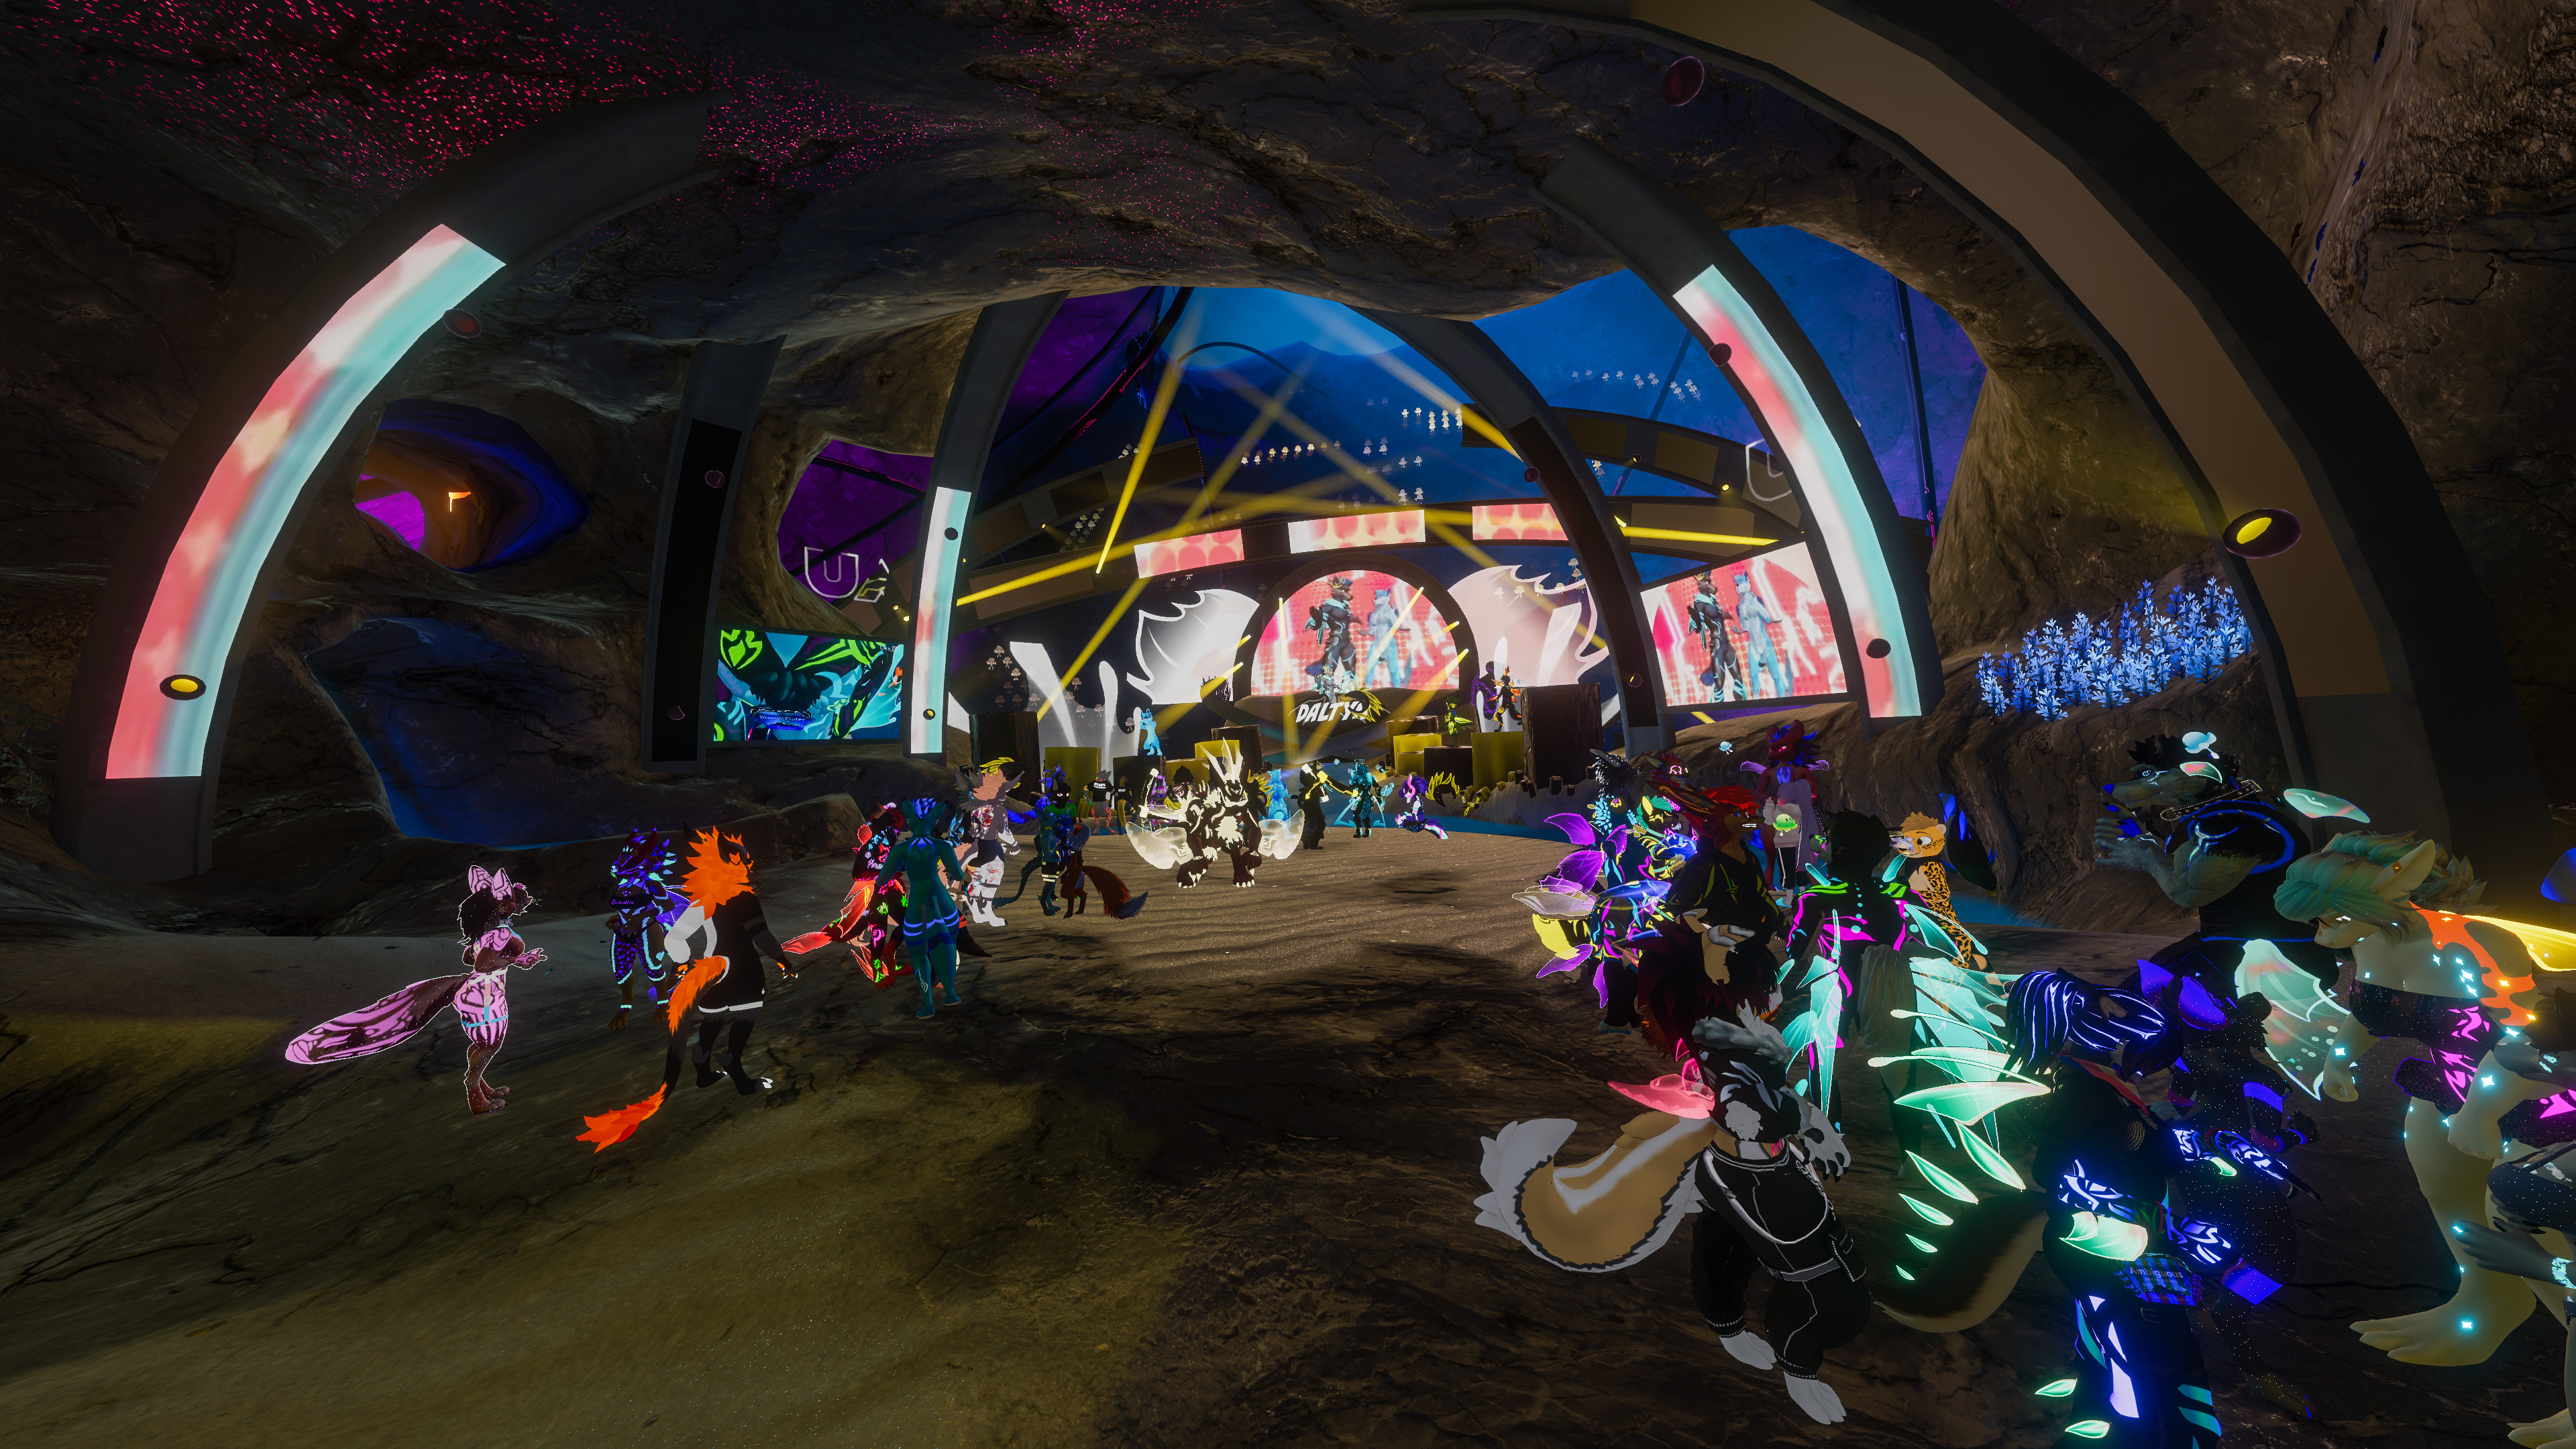 Furality AQUA's Club F.Y.N.N. in VRChat. The visuals were split into smaller displays and mapped onto multiple walls.